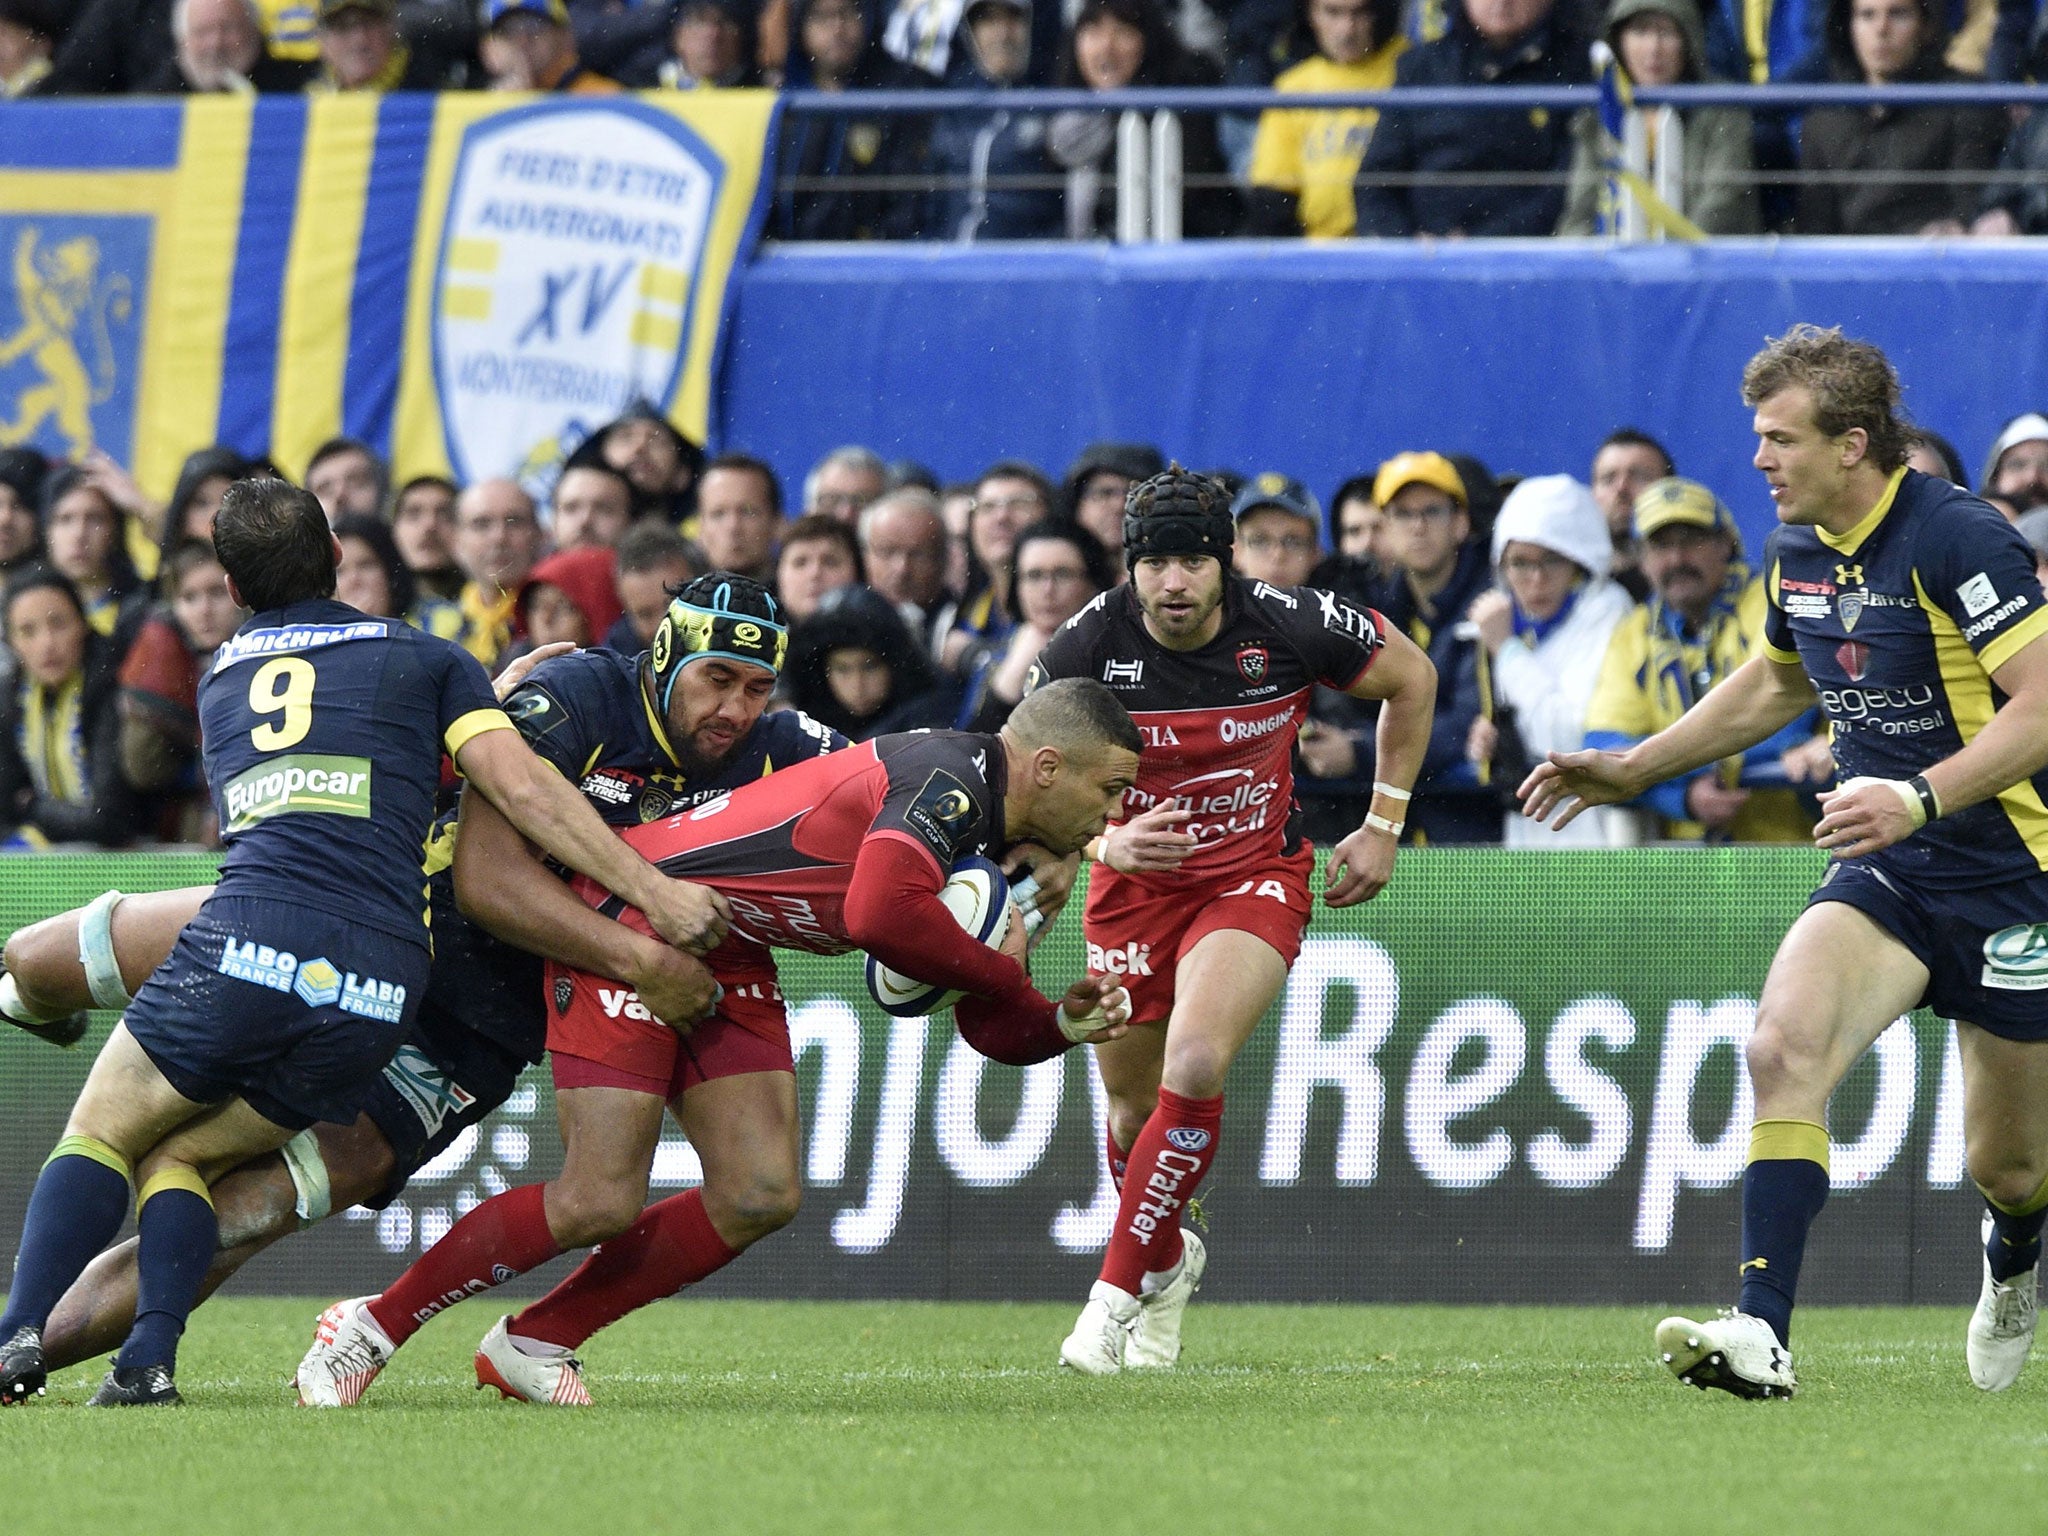 Bryan Habana is brought down by the Clermont defence